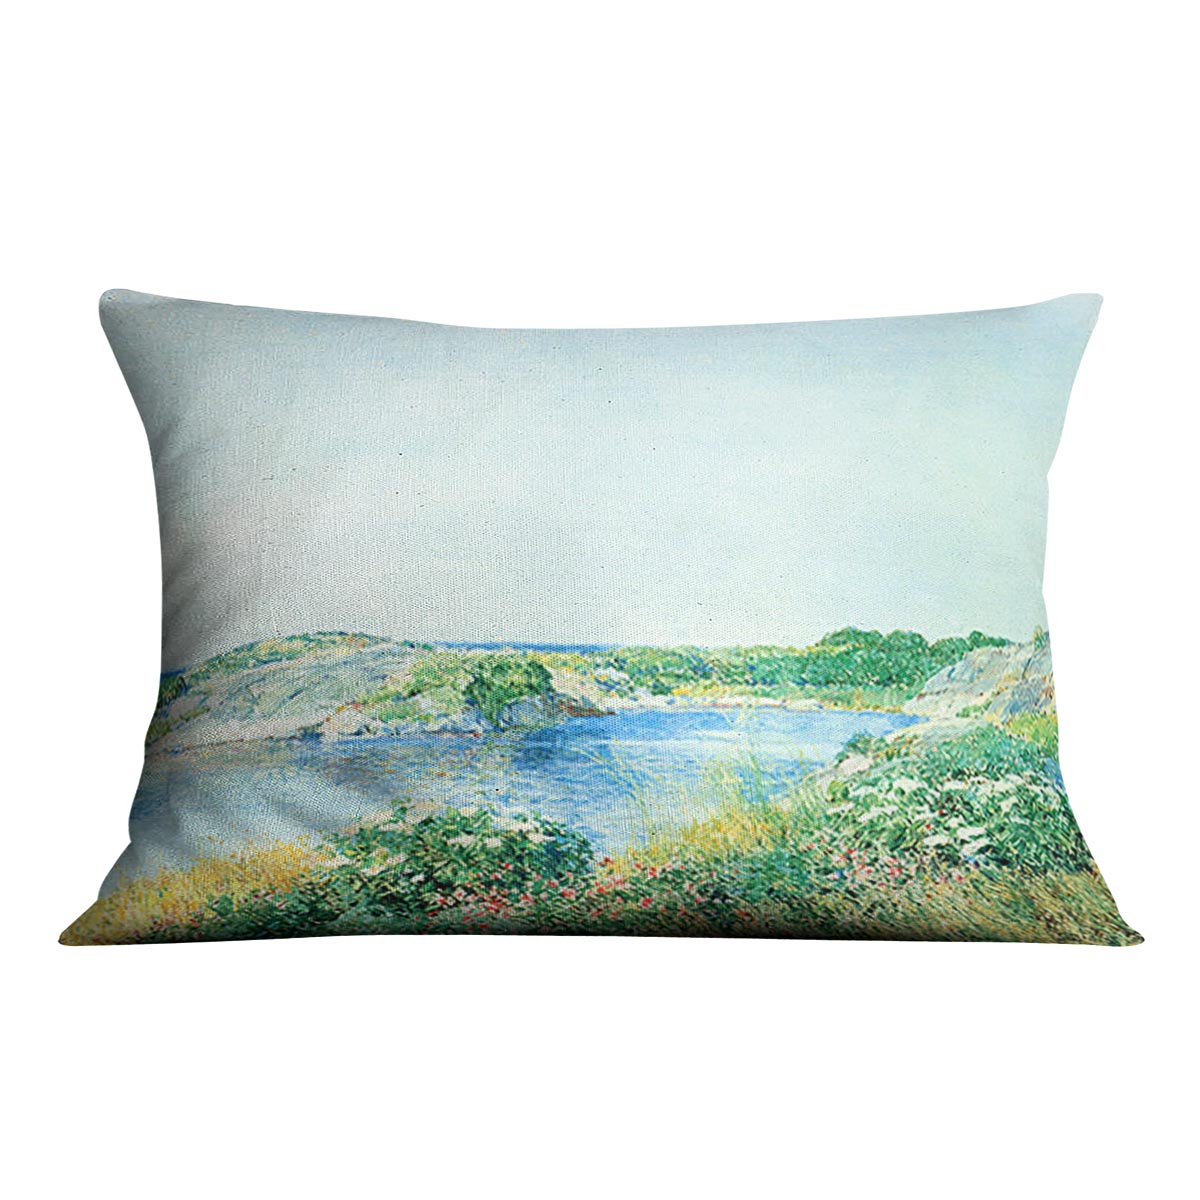 The small pond by Hassam Cushion - Canvas Art Rocks - 4